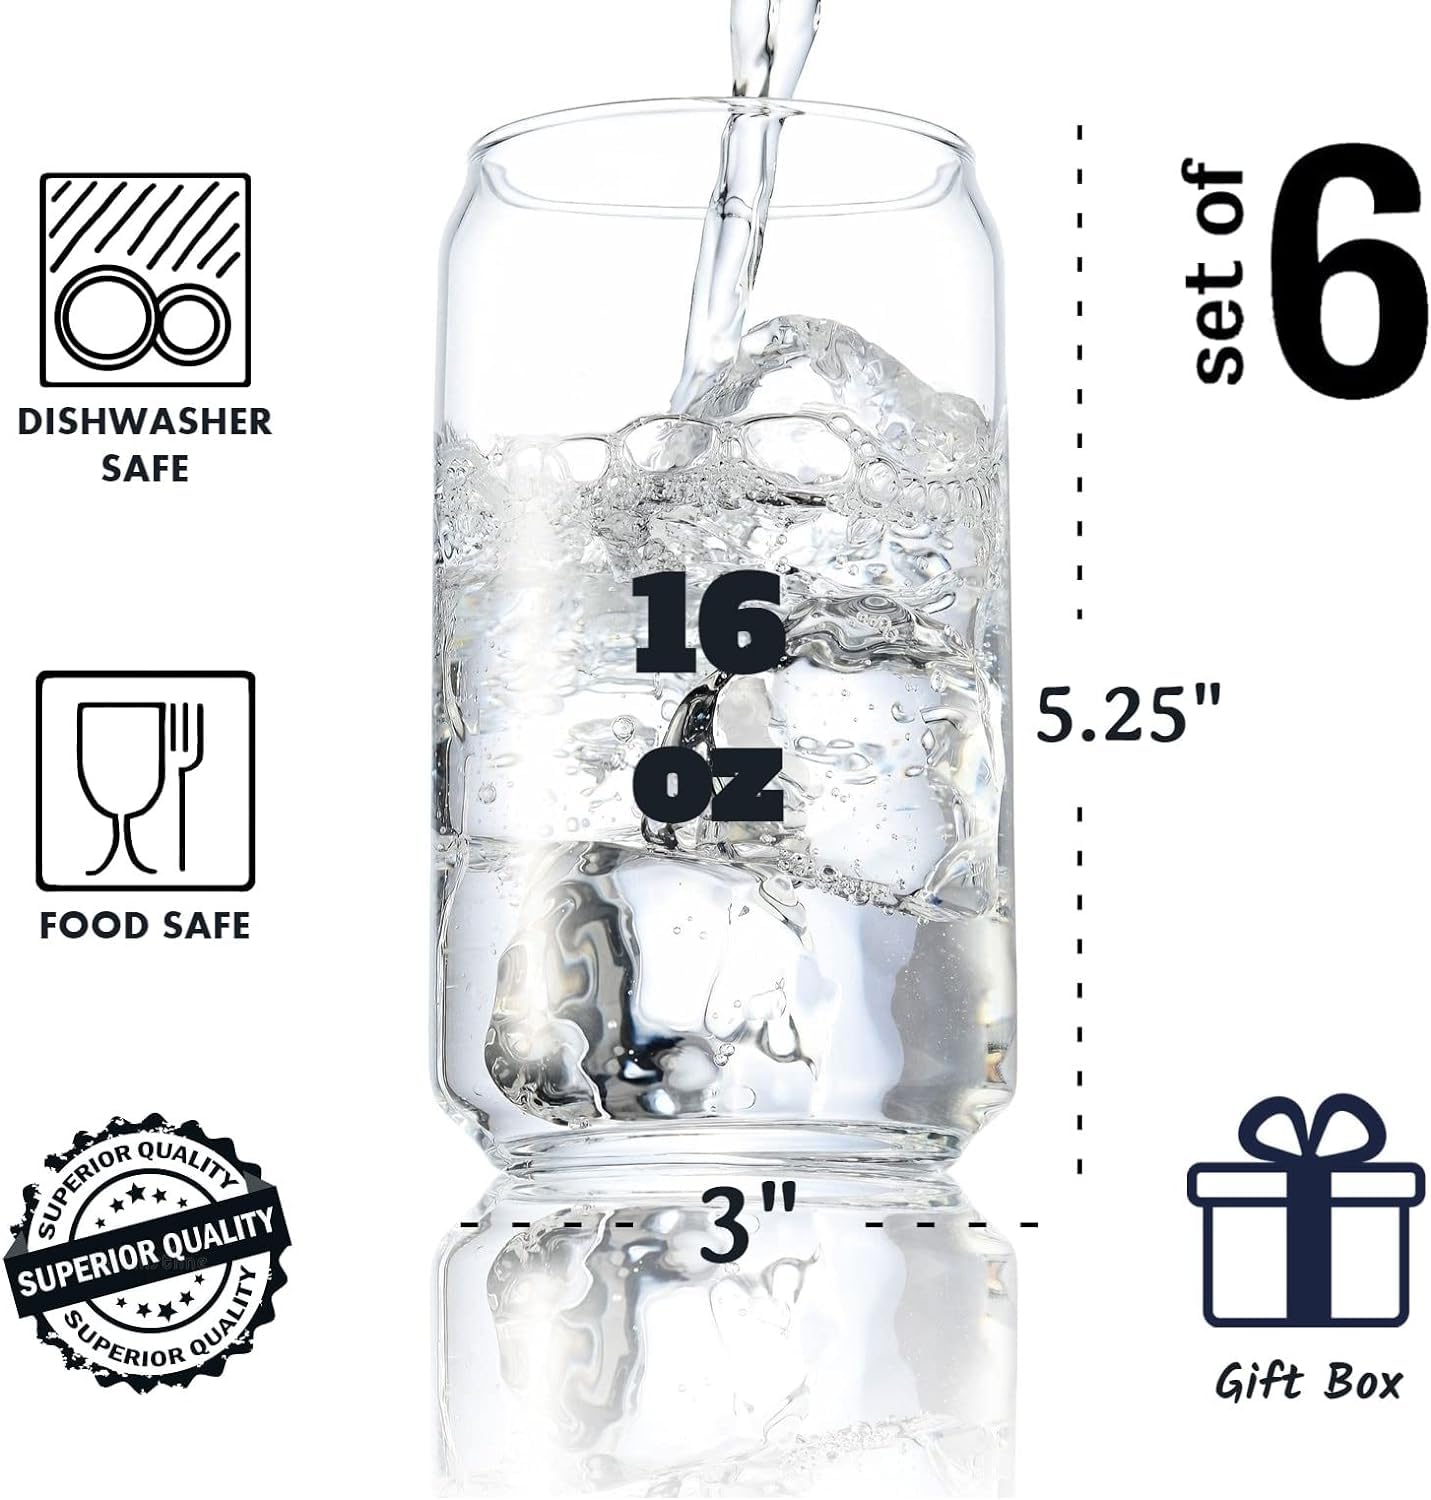 BENETI Modern Glass Cups, Highball Drinking Glasses Set of 6 | Made in Europe | Water, Juice or Beer Kitchen Glassware Set, Perfect for Party's and Gifts for Men and Women of All Ages  - Like New